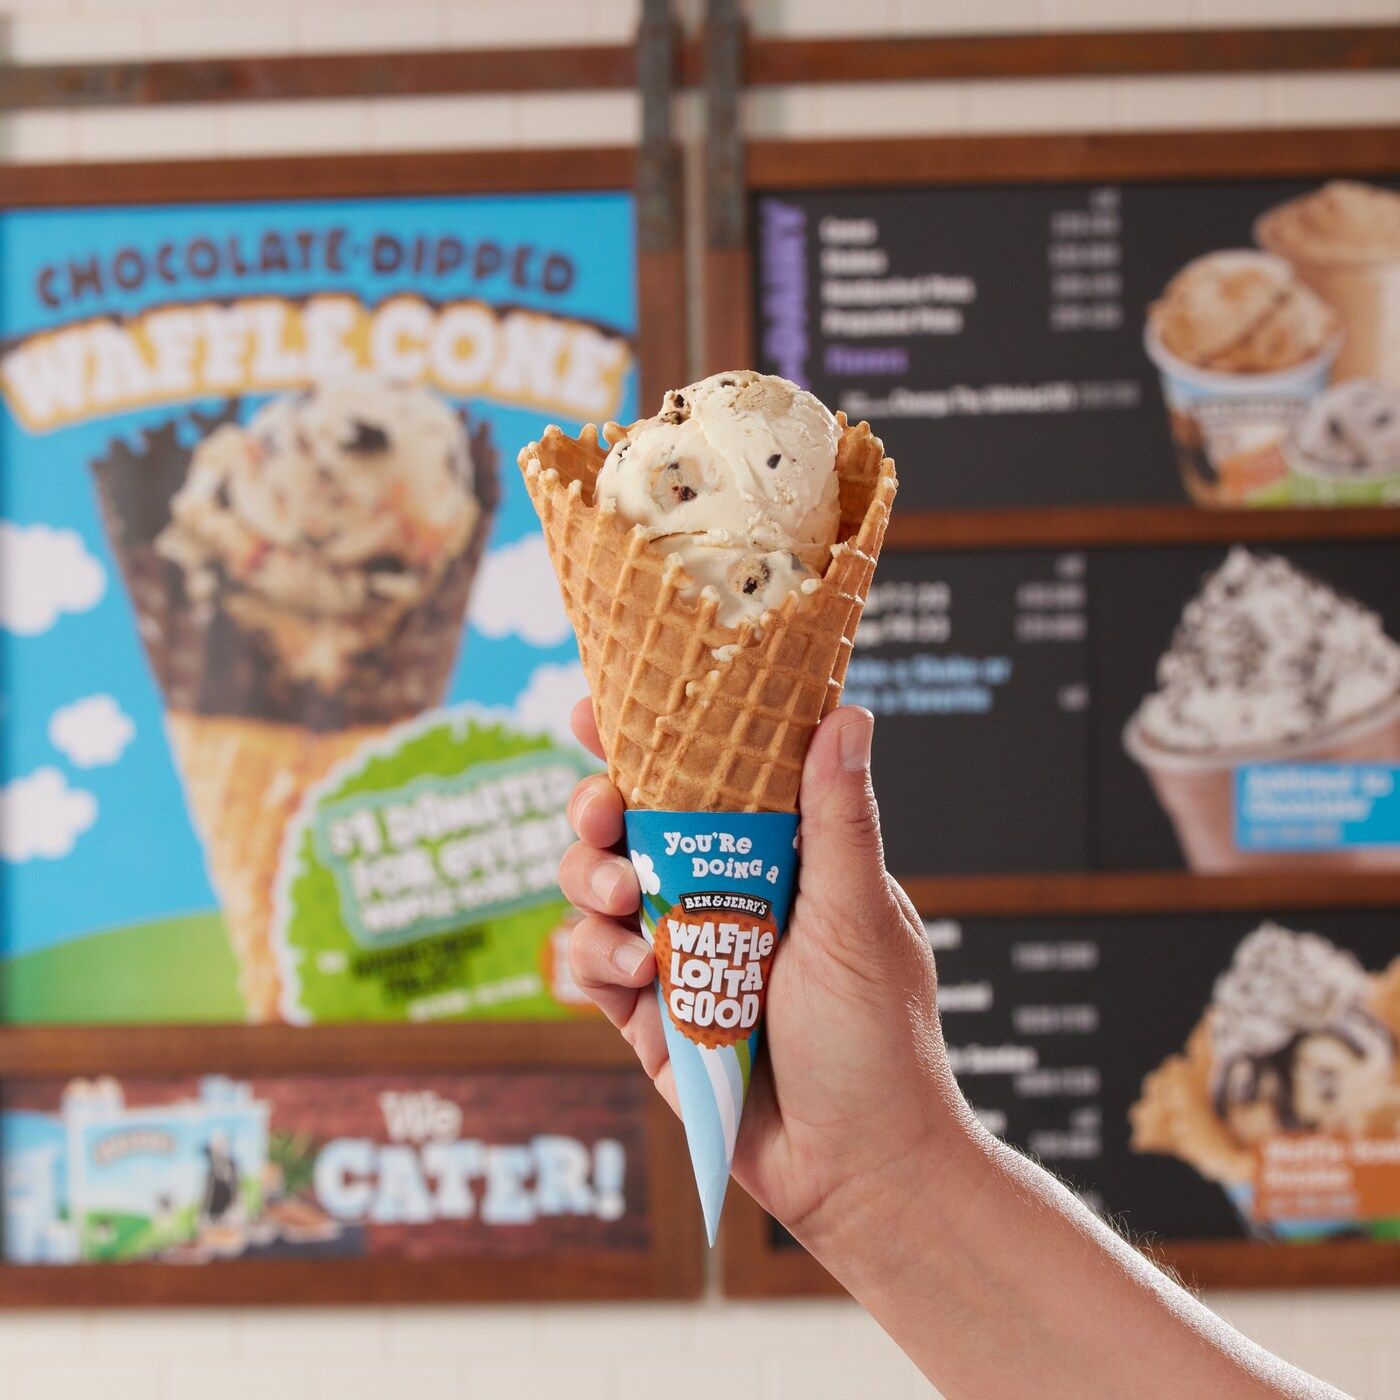 Frozen Solutions Provides Custom Cone Wrappers for the Ben & Jerry's Inaugural Waffle Lotta Good Program